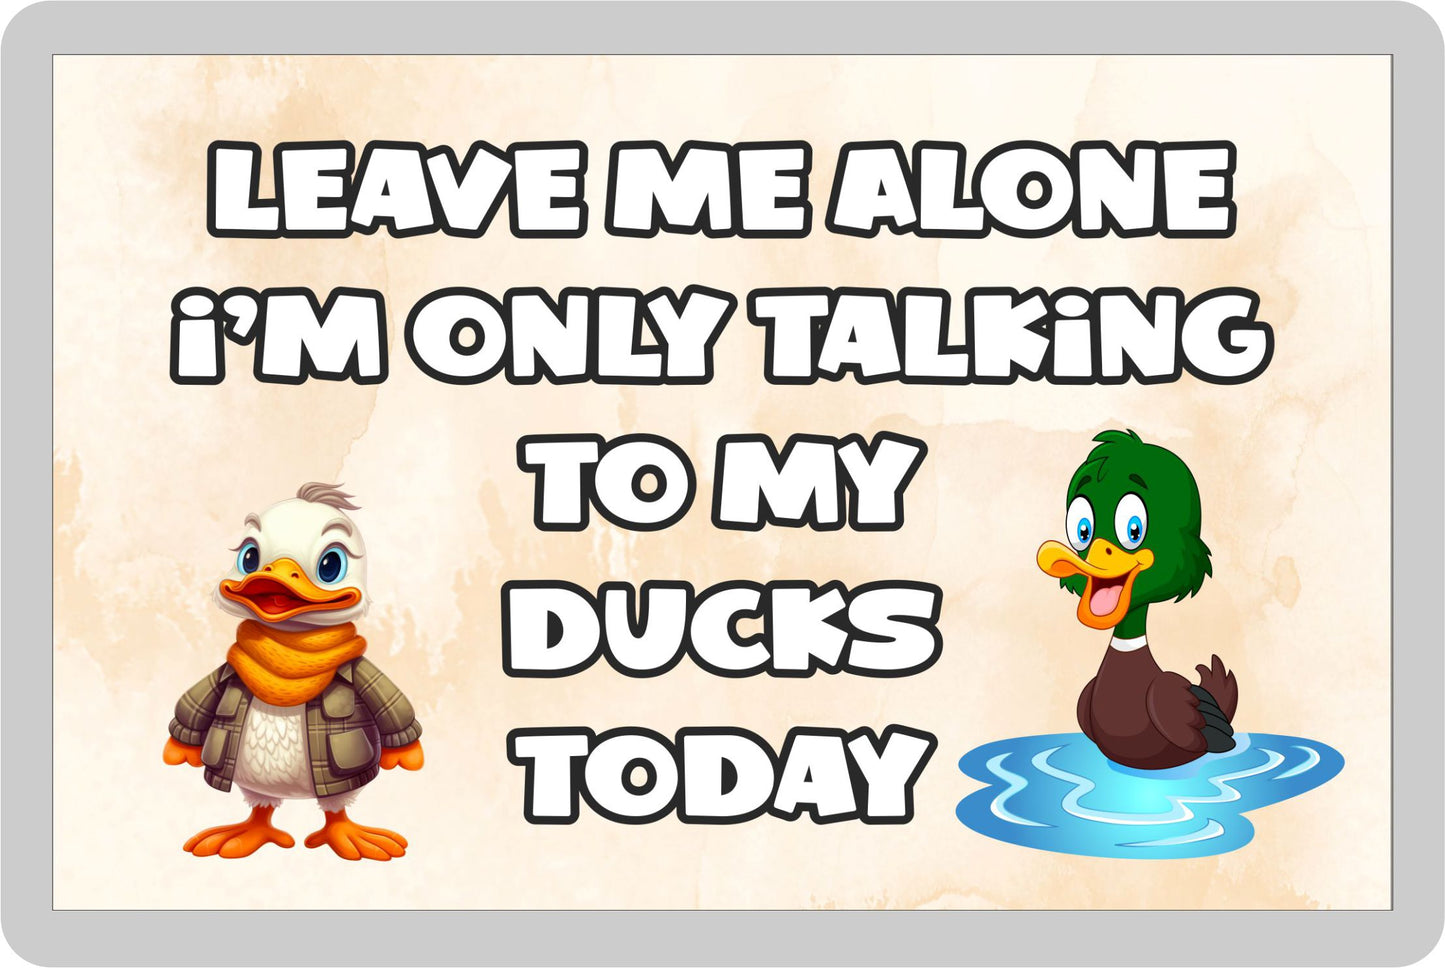 Duck Fridge Magnet Gift - Leave Me Alone I'm Only Talking To My * Today - Novelty Cute Bird Animal Present